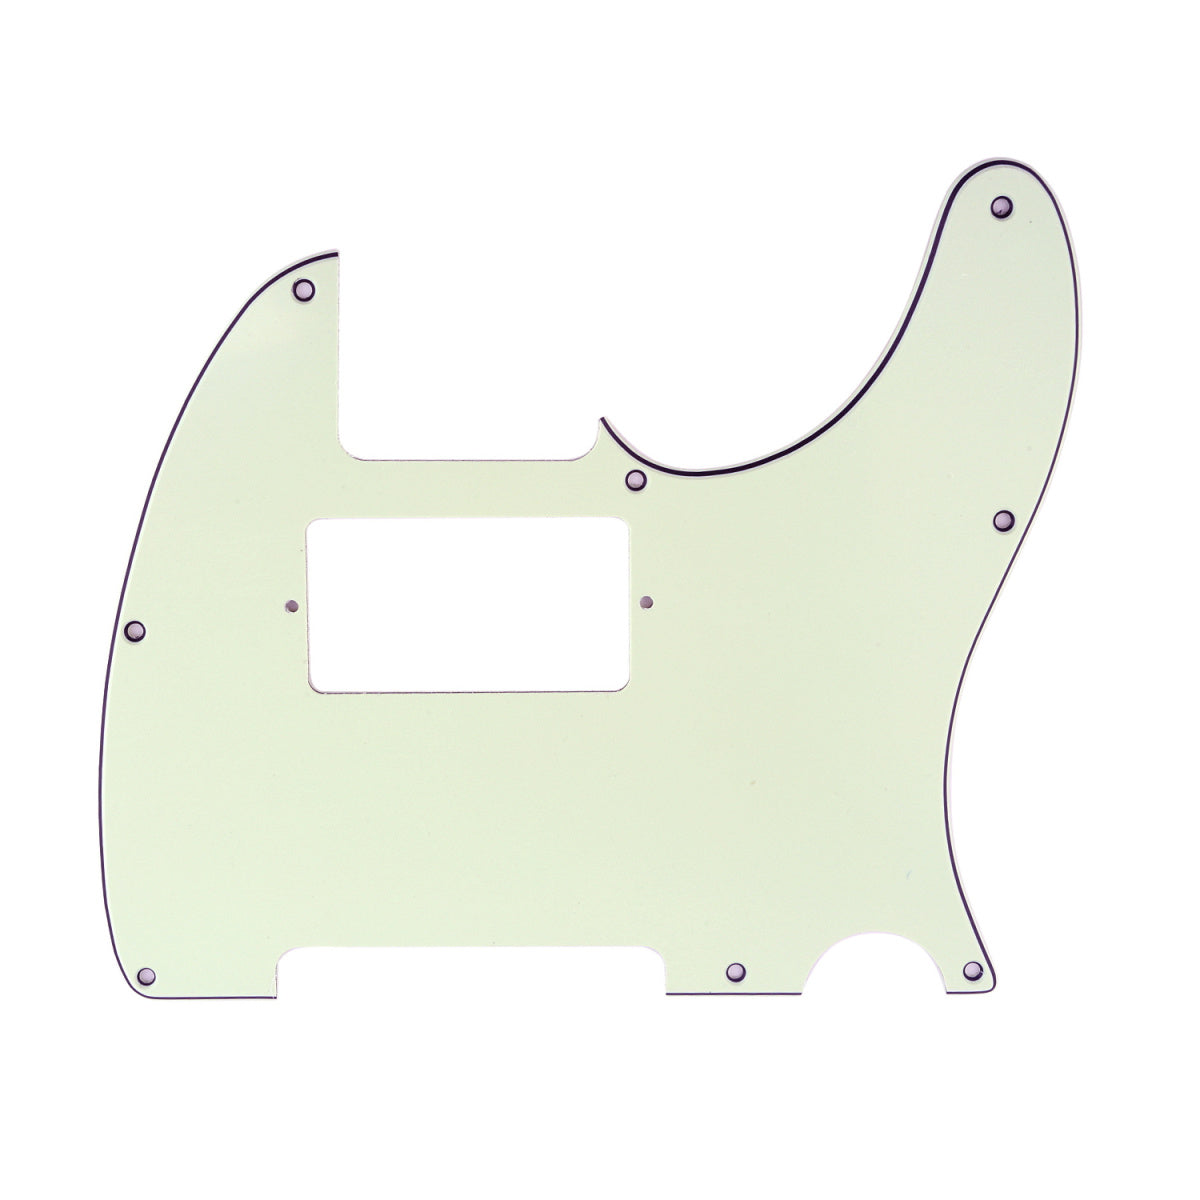 Musiclily 8 Hole Guitar Tele Pickguard Humbucker HH for USA/Mexican Made Fender Standard Telecaster Modern Style,3Ply Ivory